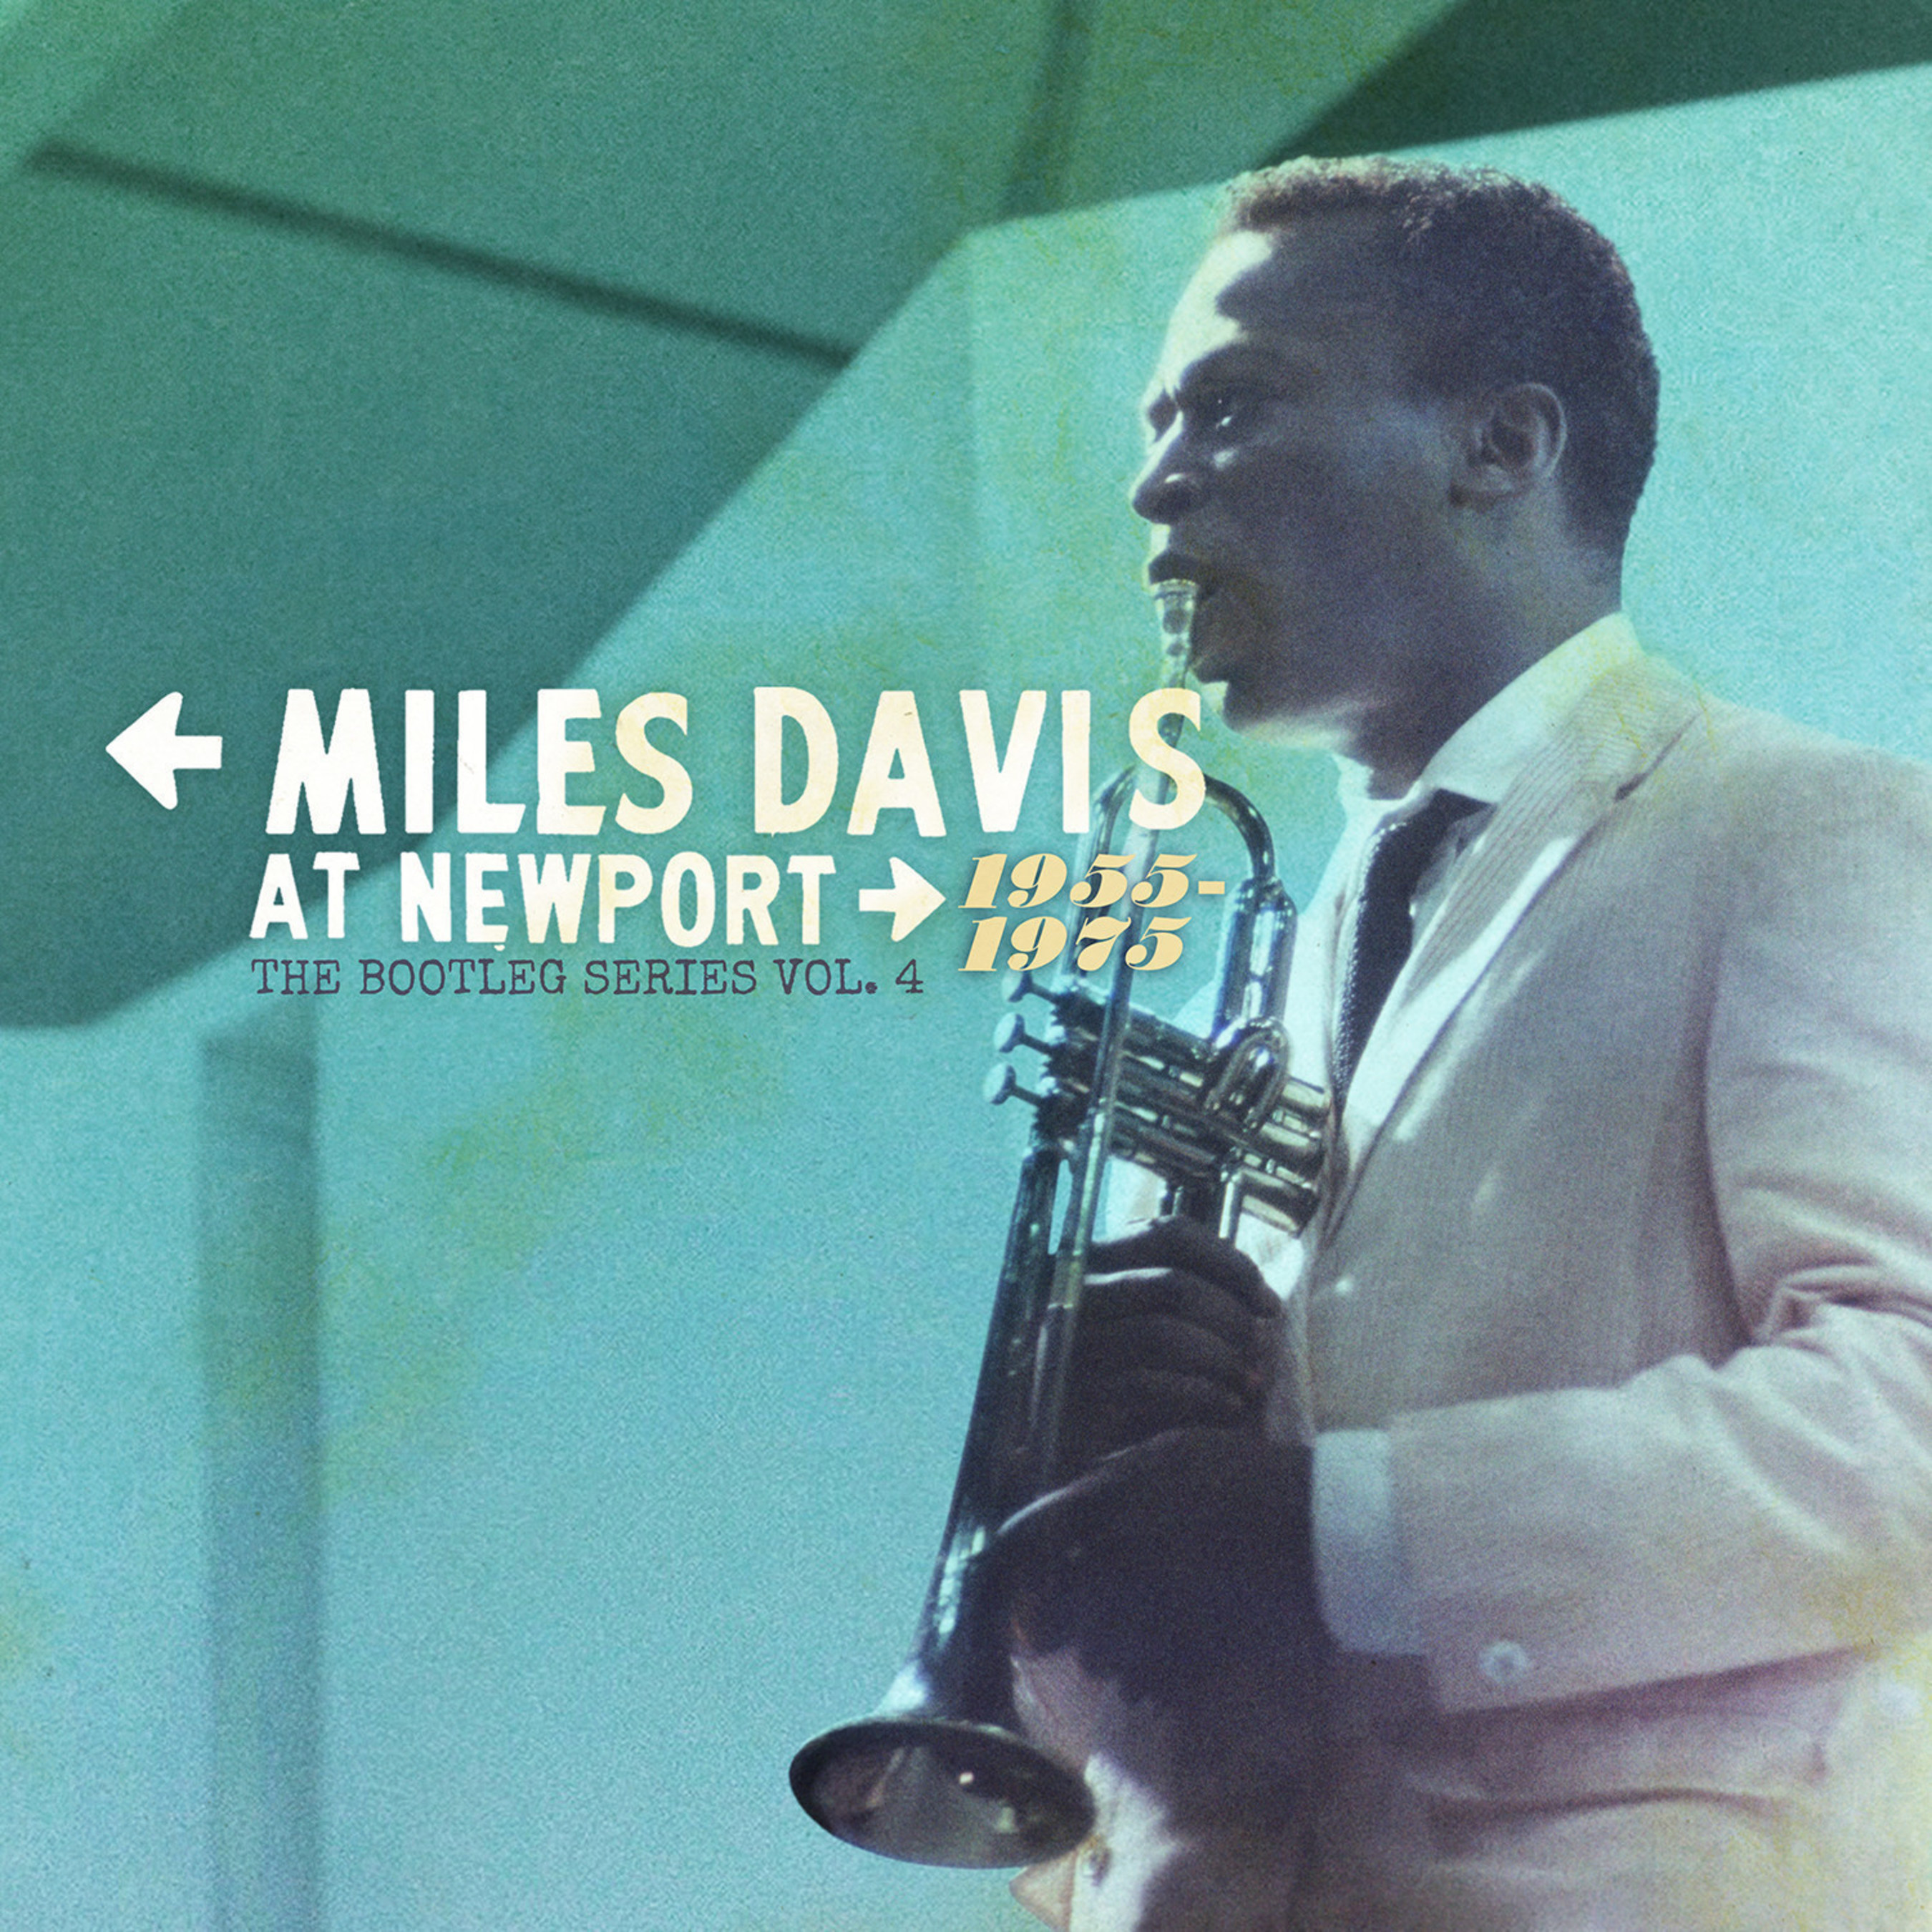 Ahead of the Newport Jazz Festival (July 31, August 1 & 2) the MILES DAVIS AT NEWPORT 1955-1975 will be available everywhere on Friday, July 17